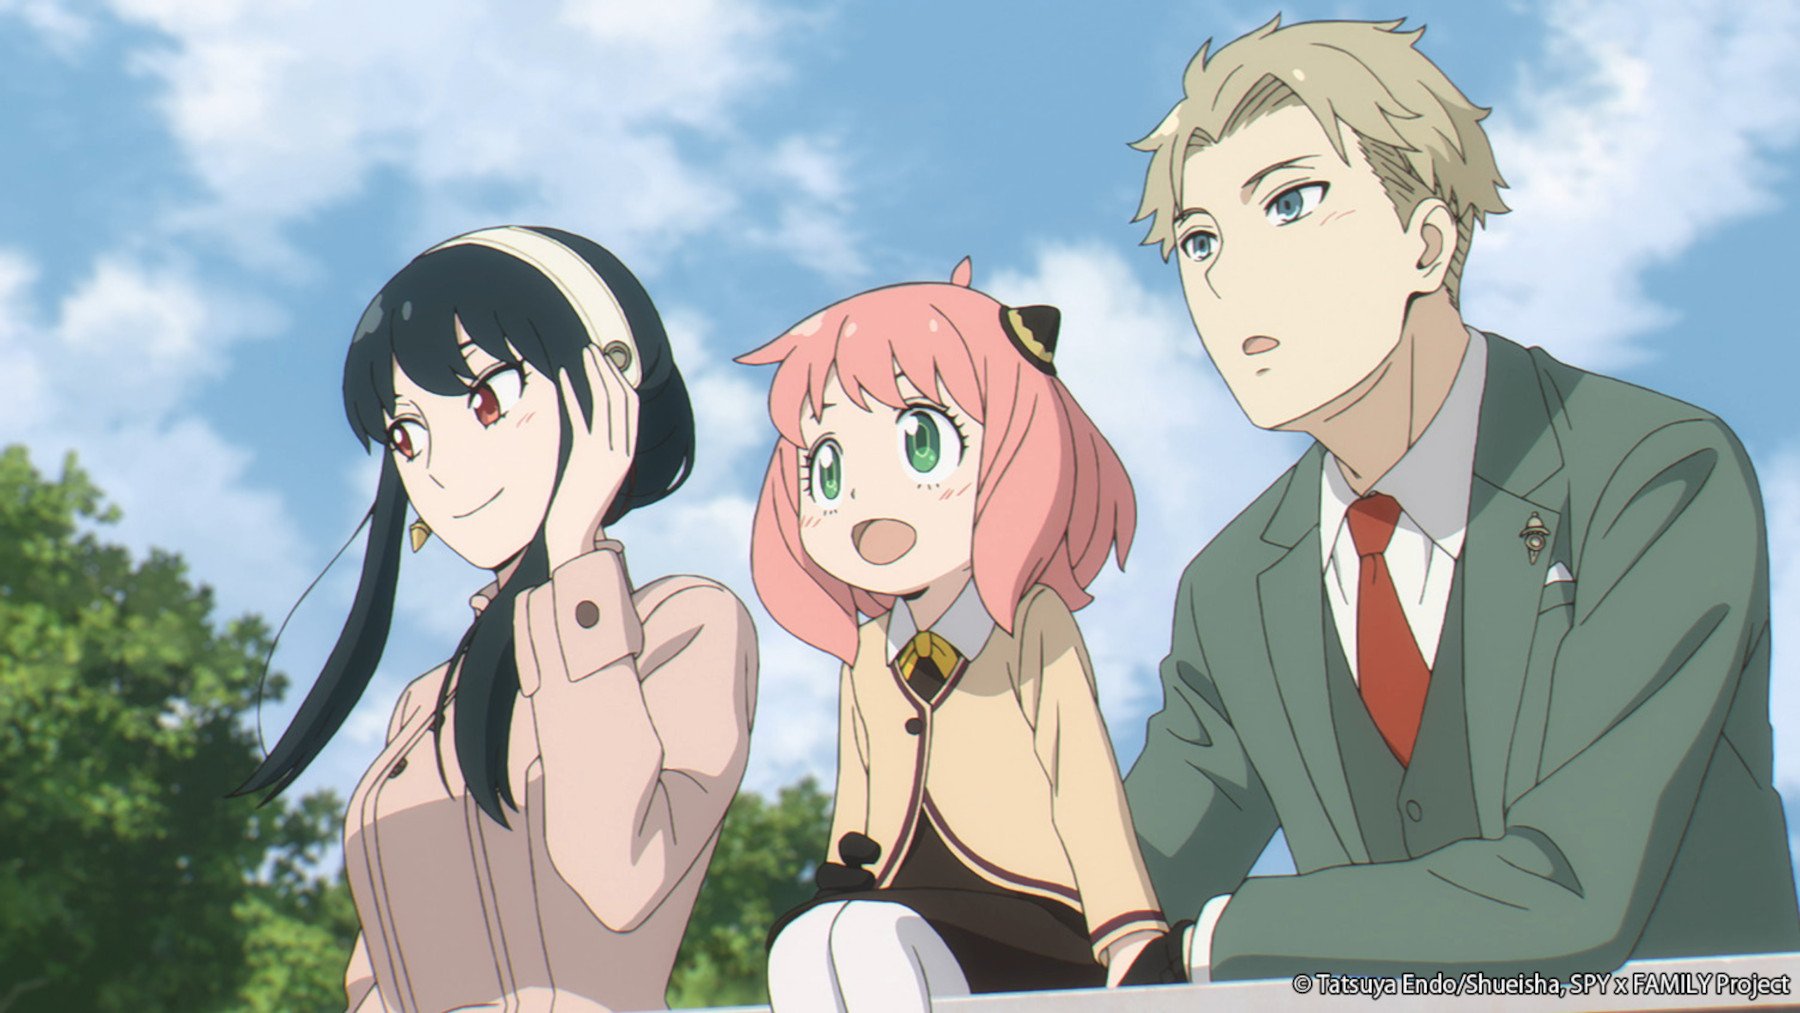 Yor, Anya, and Loid Forger in 'Spy x Family,' which returns for season 1 part 2 in October. They're standing next to one another, leaning against a railing, and smiling.